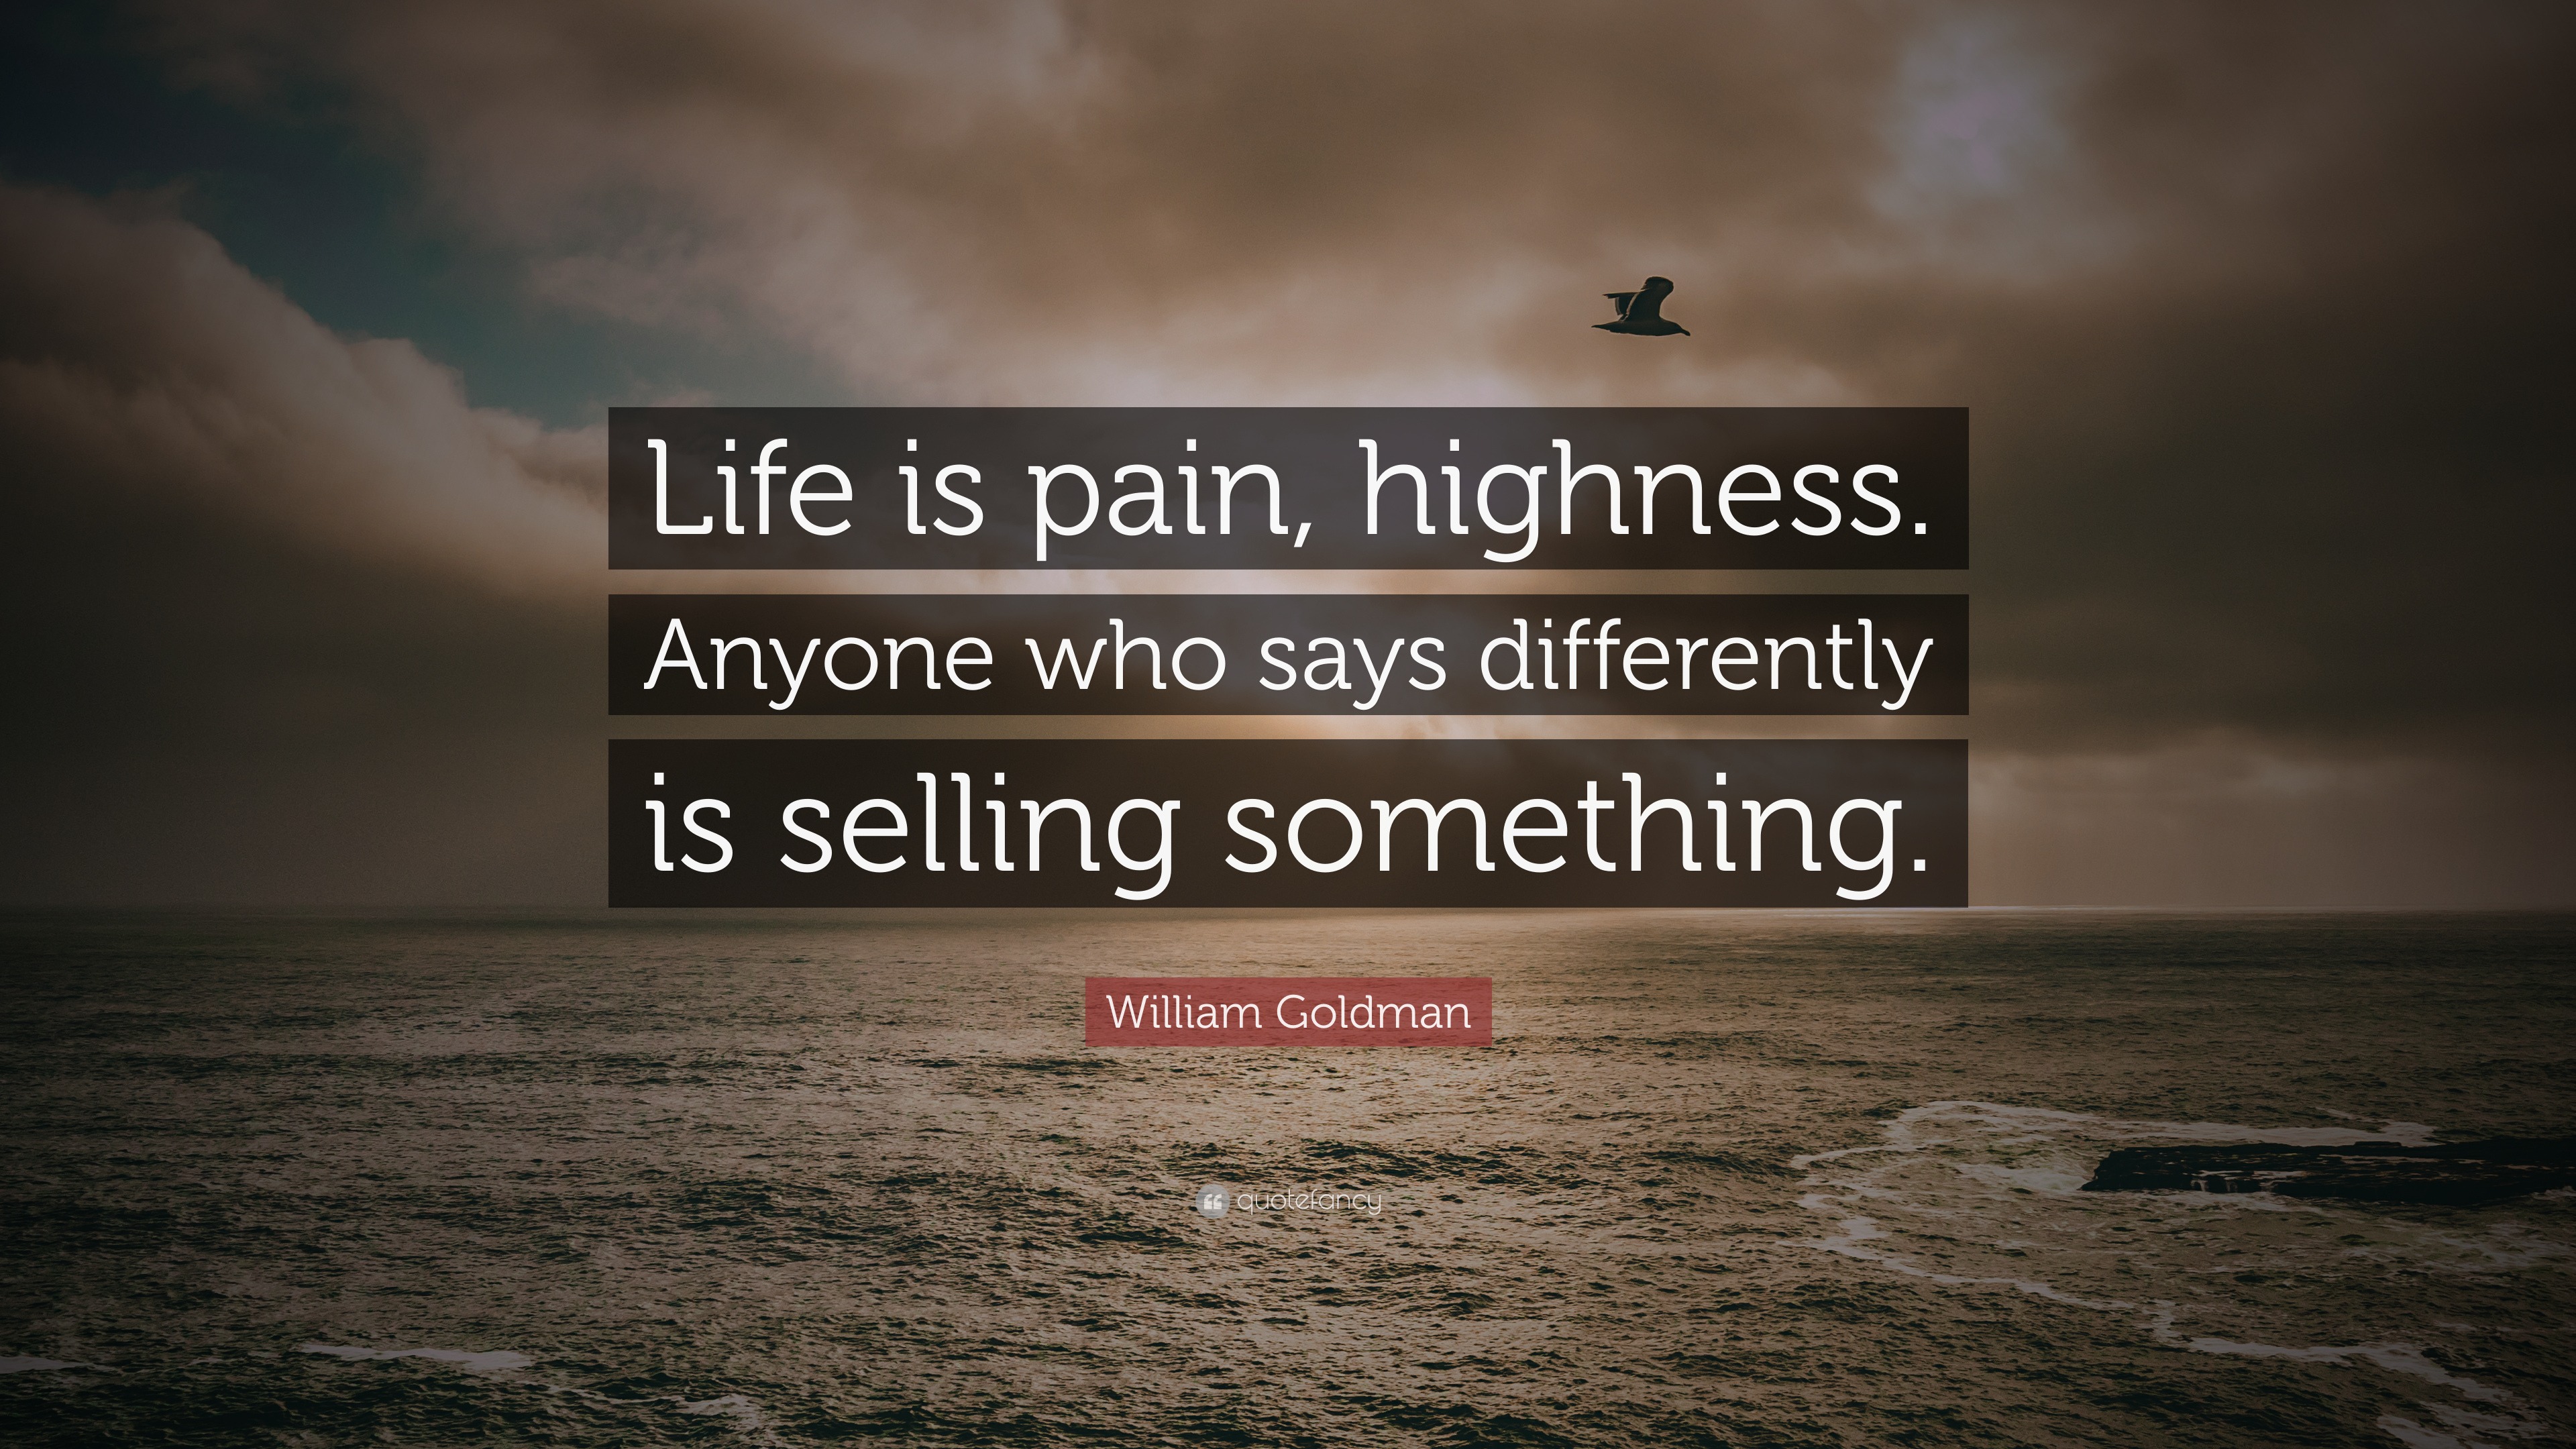 William Goldman Quote: “Life is pain, highness. Anyone who says